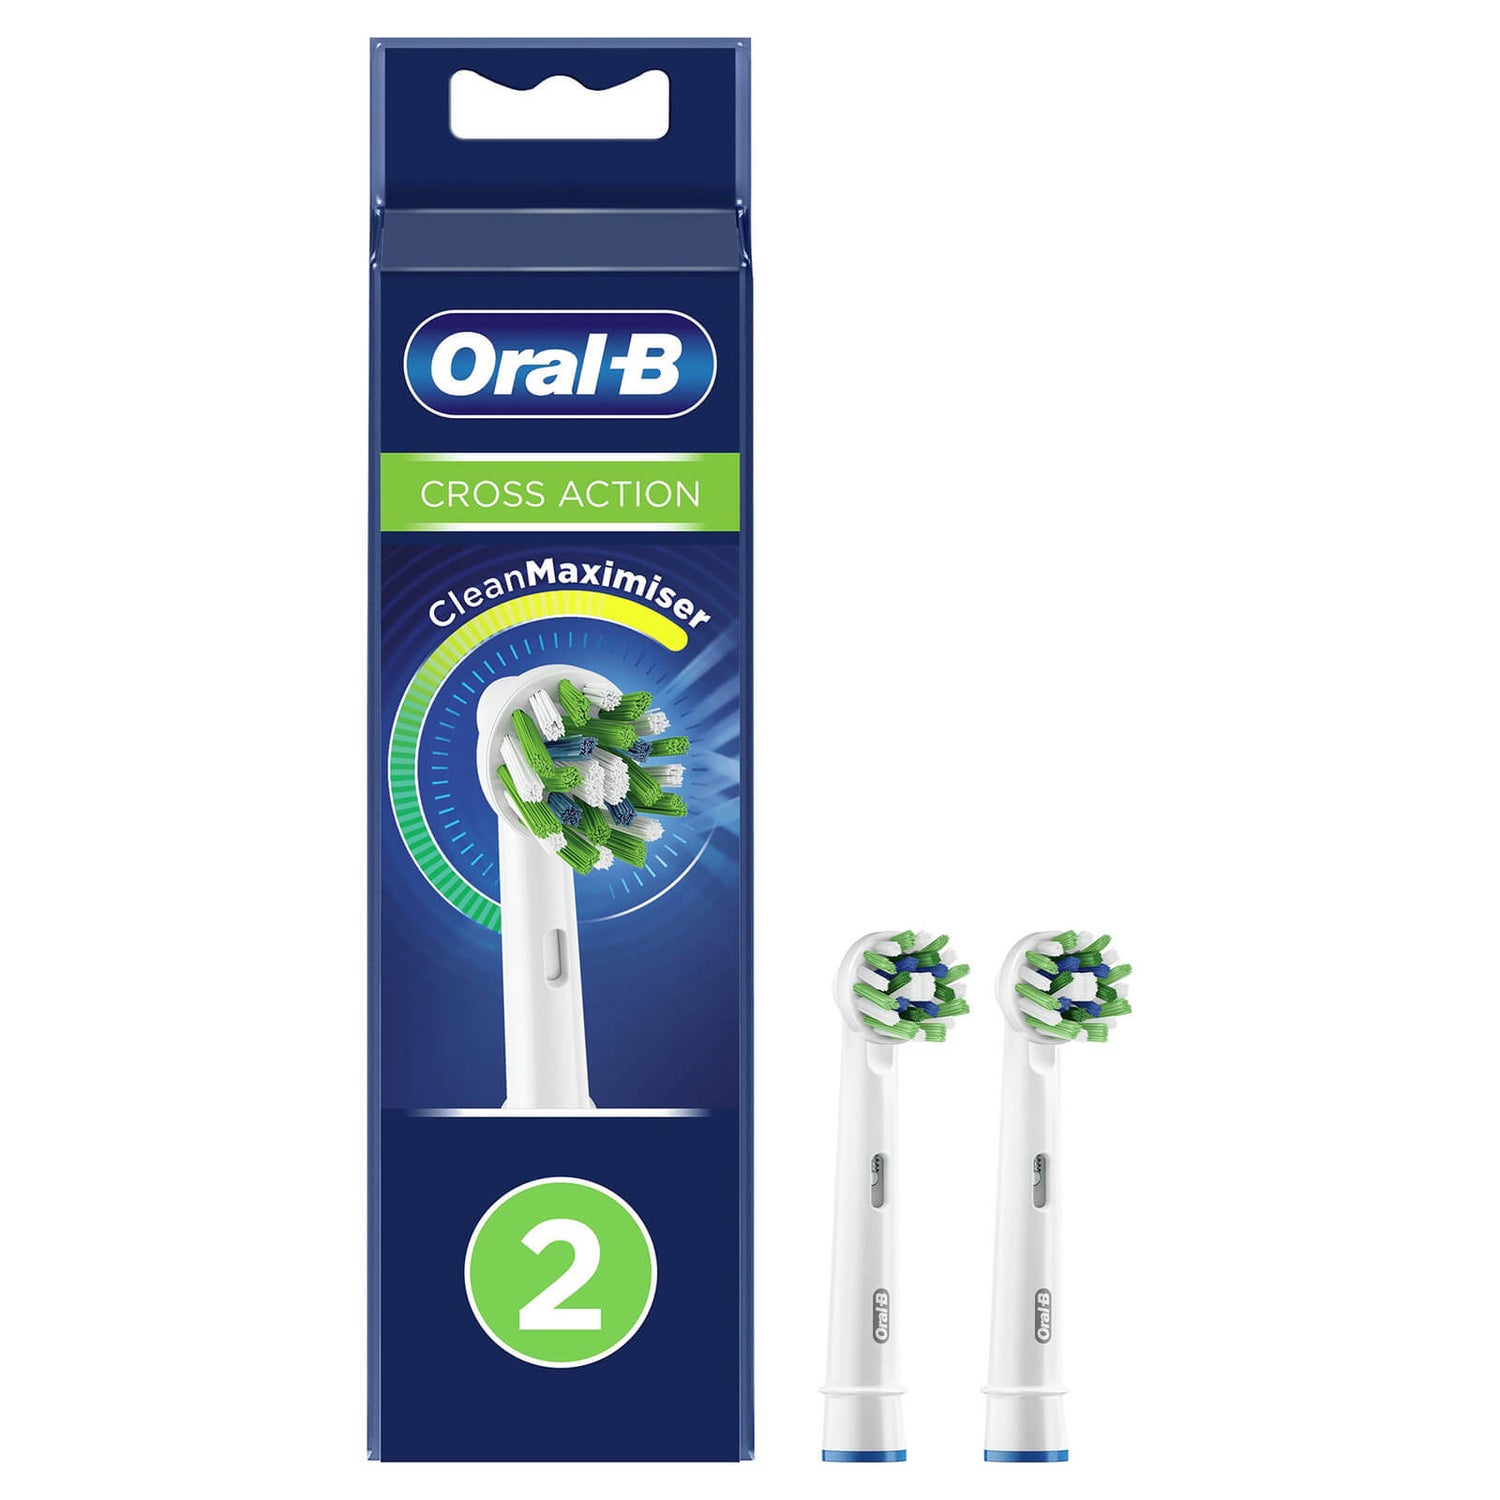 Oral-B CrossAction Toothbrush Head with CleanMaximiser Technology, Pack of 2 Counts